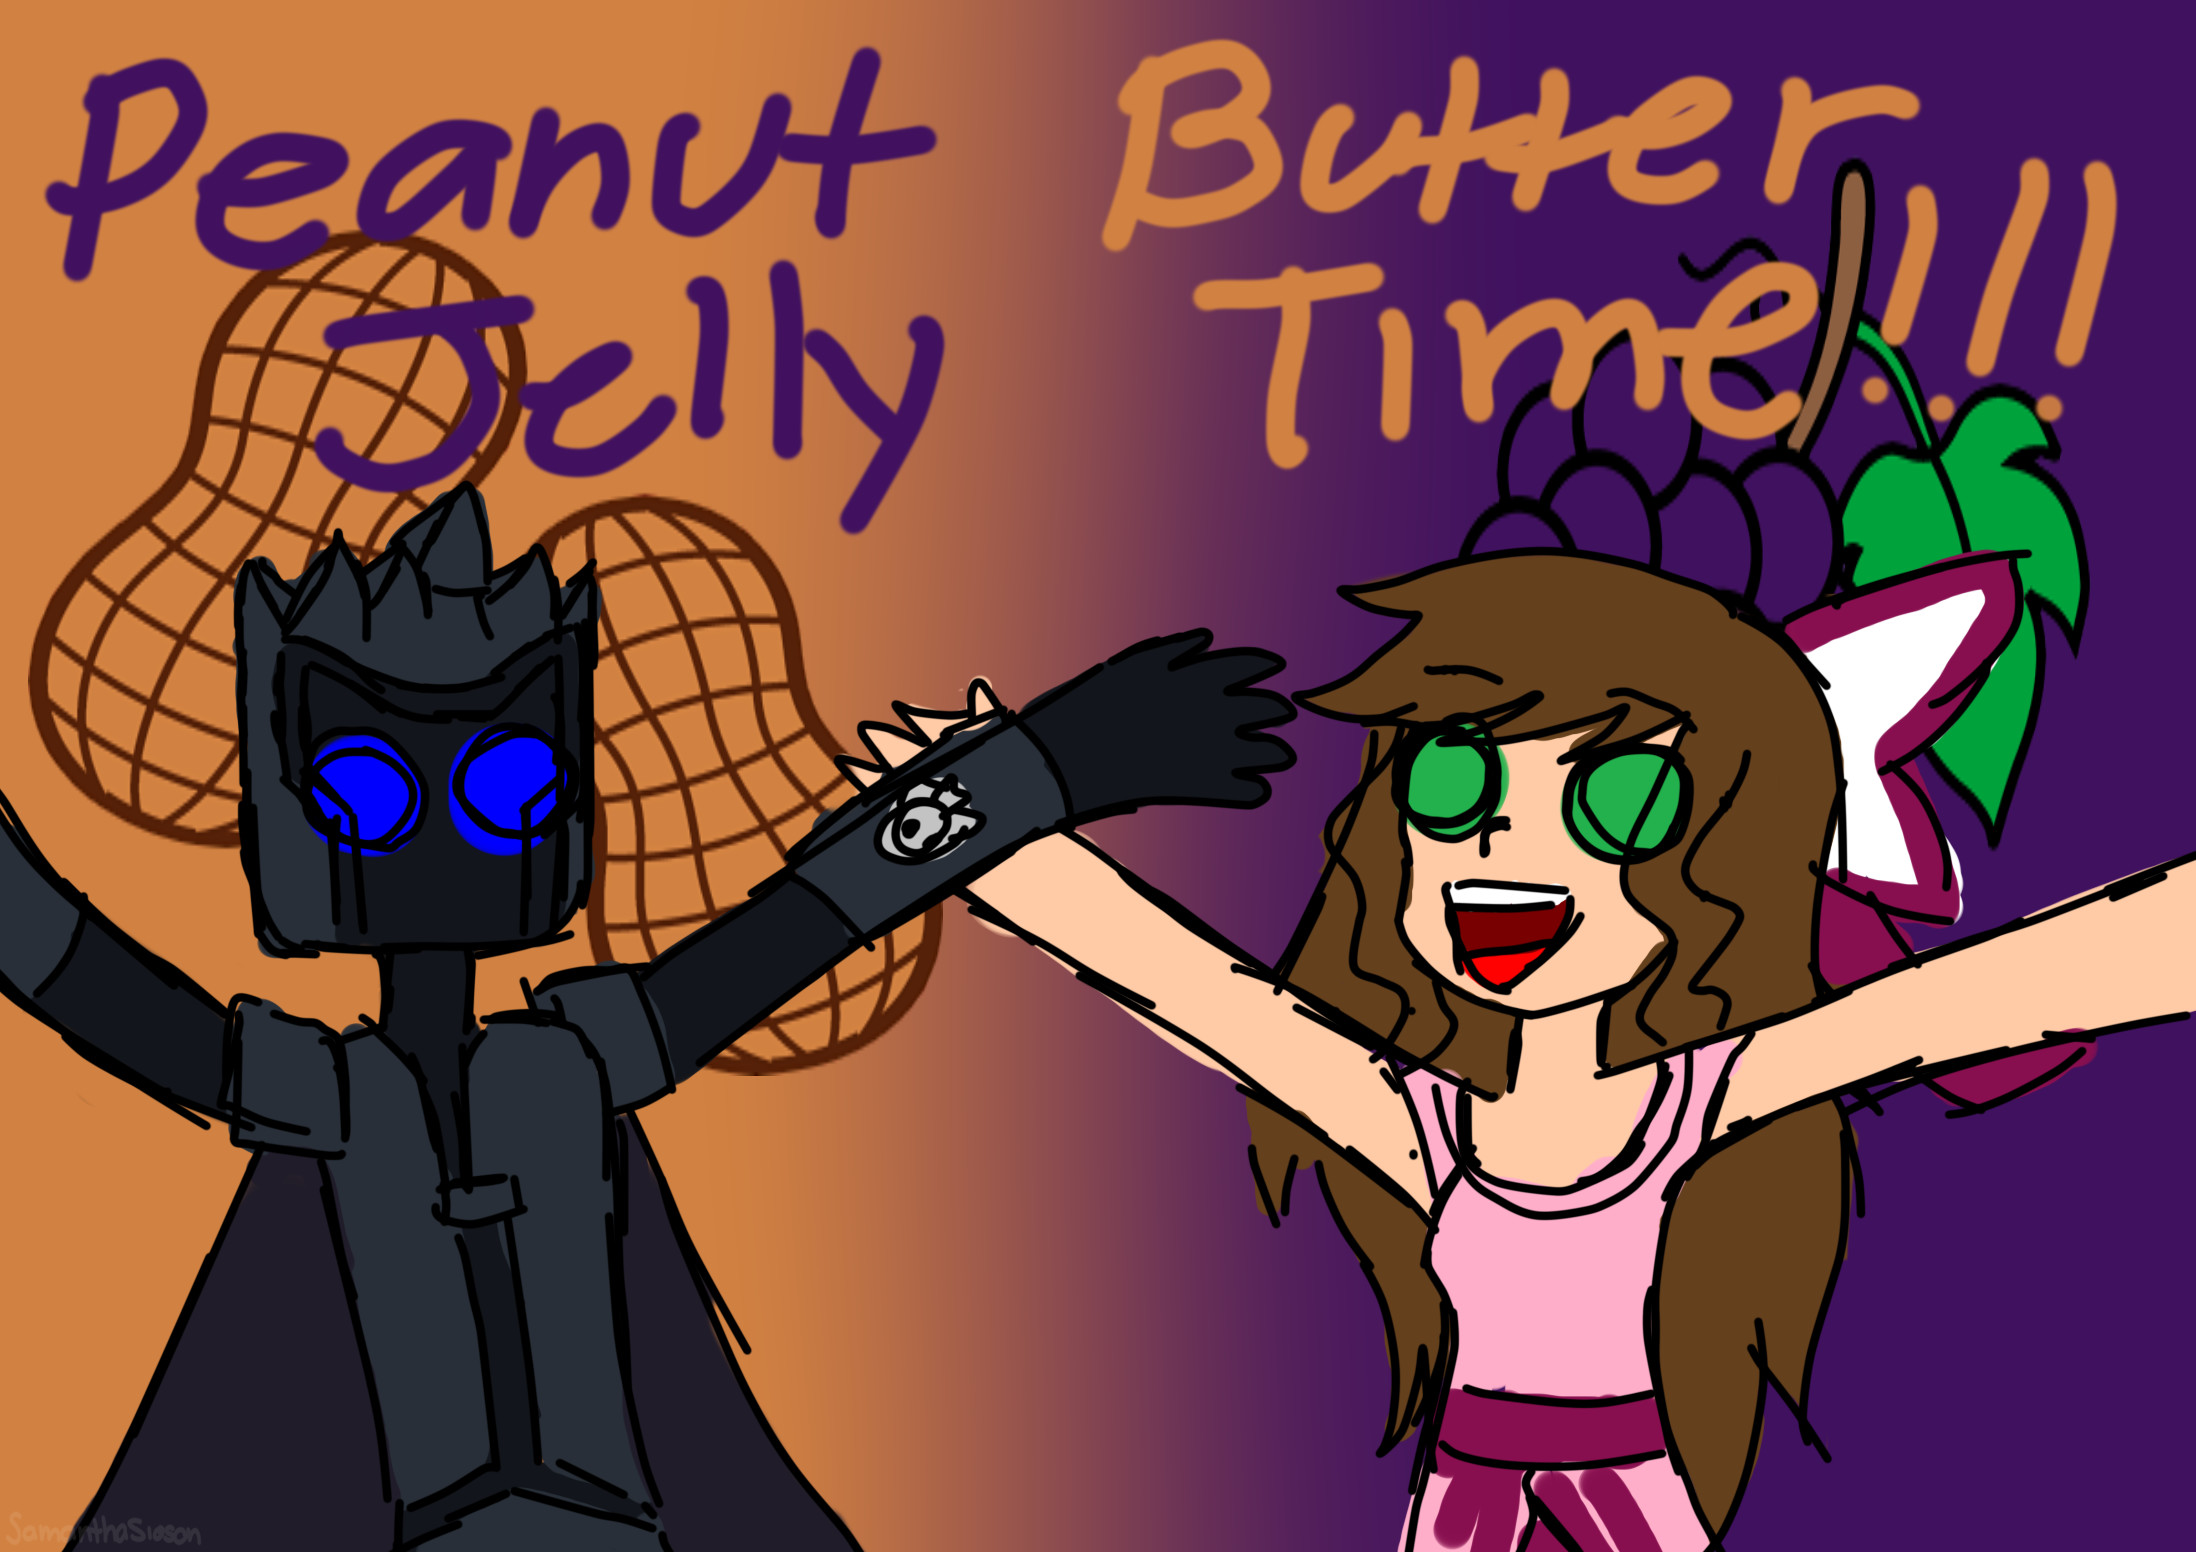 Peanut Butter Jelly Time by SamanthaSioson Peanut Butter Jelly Time by SamanthaSioson